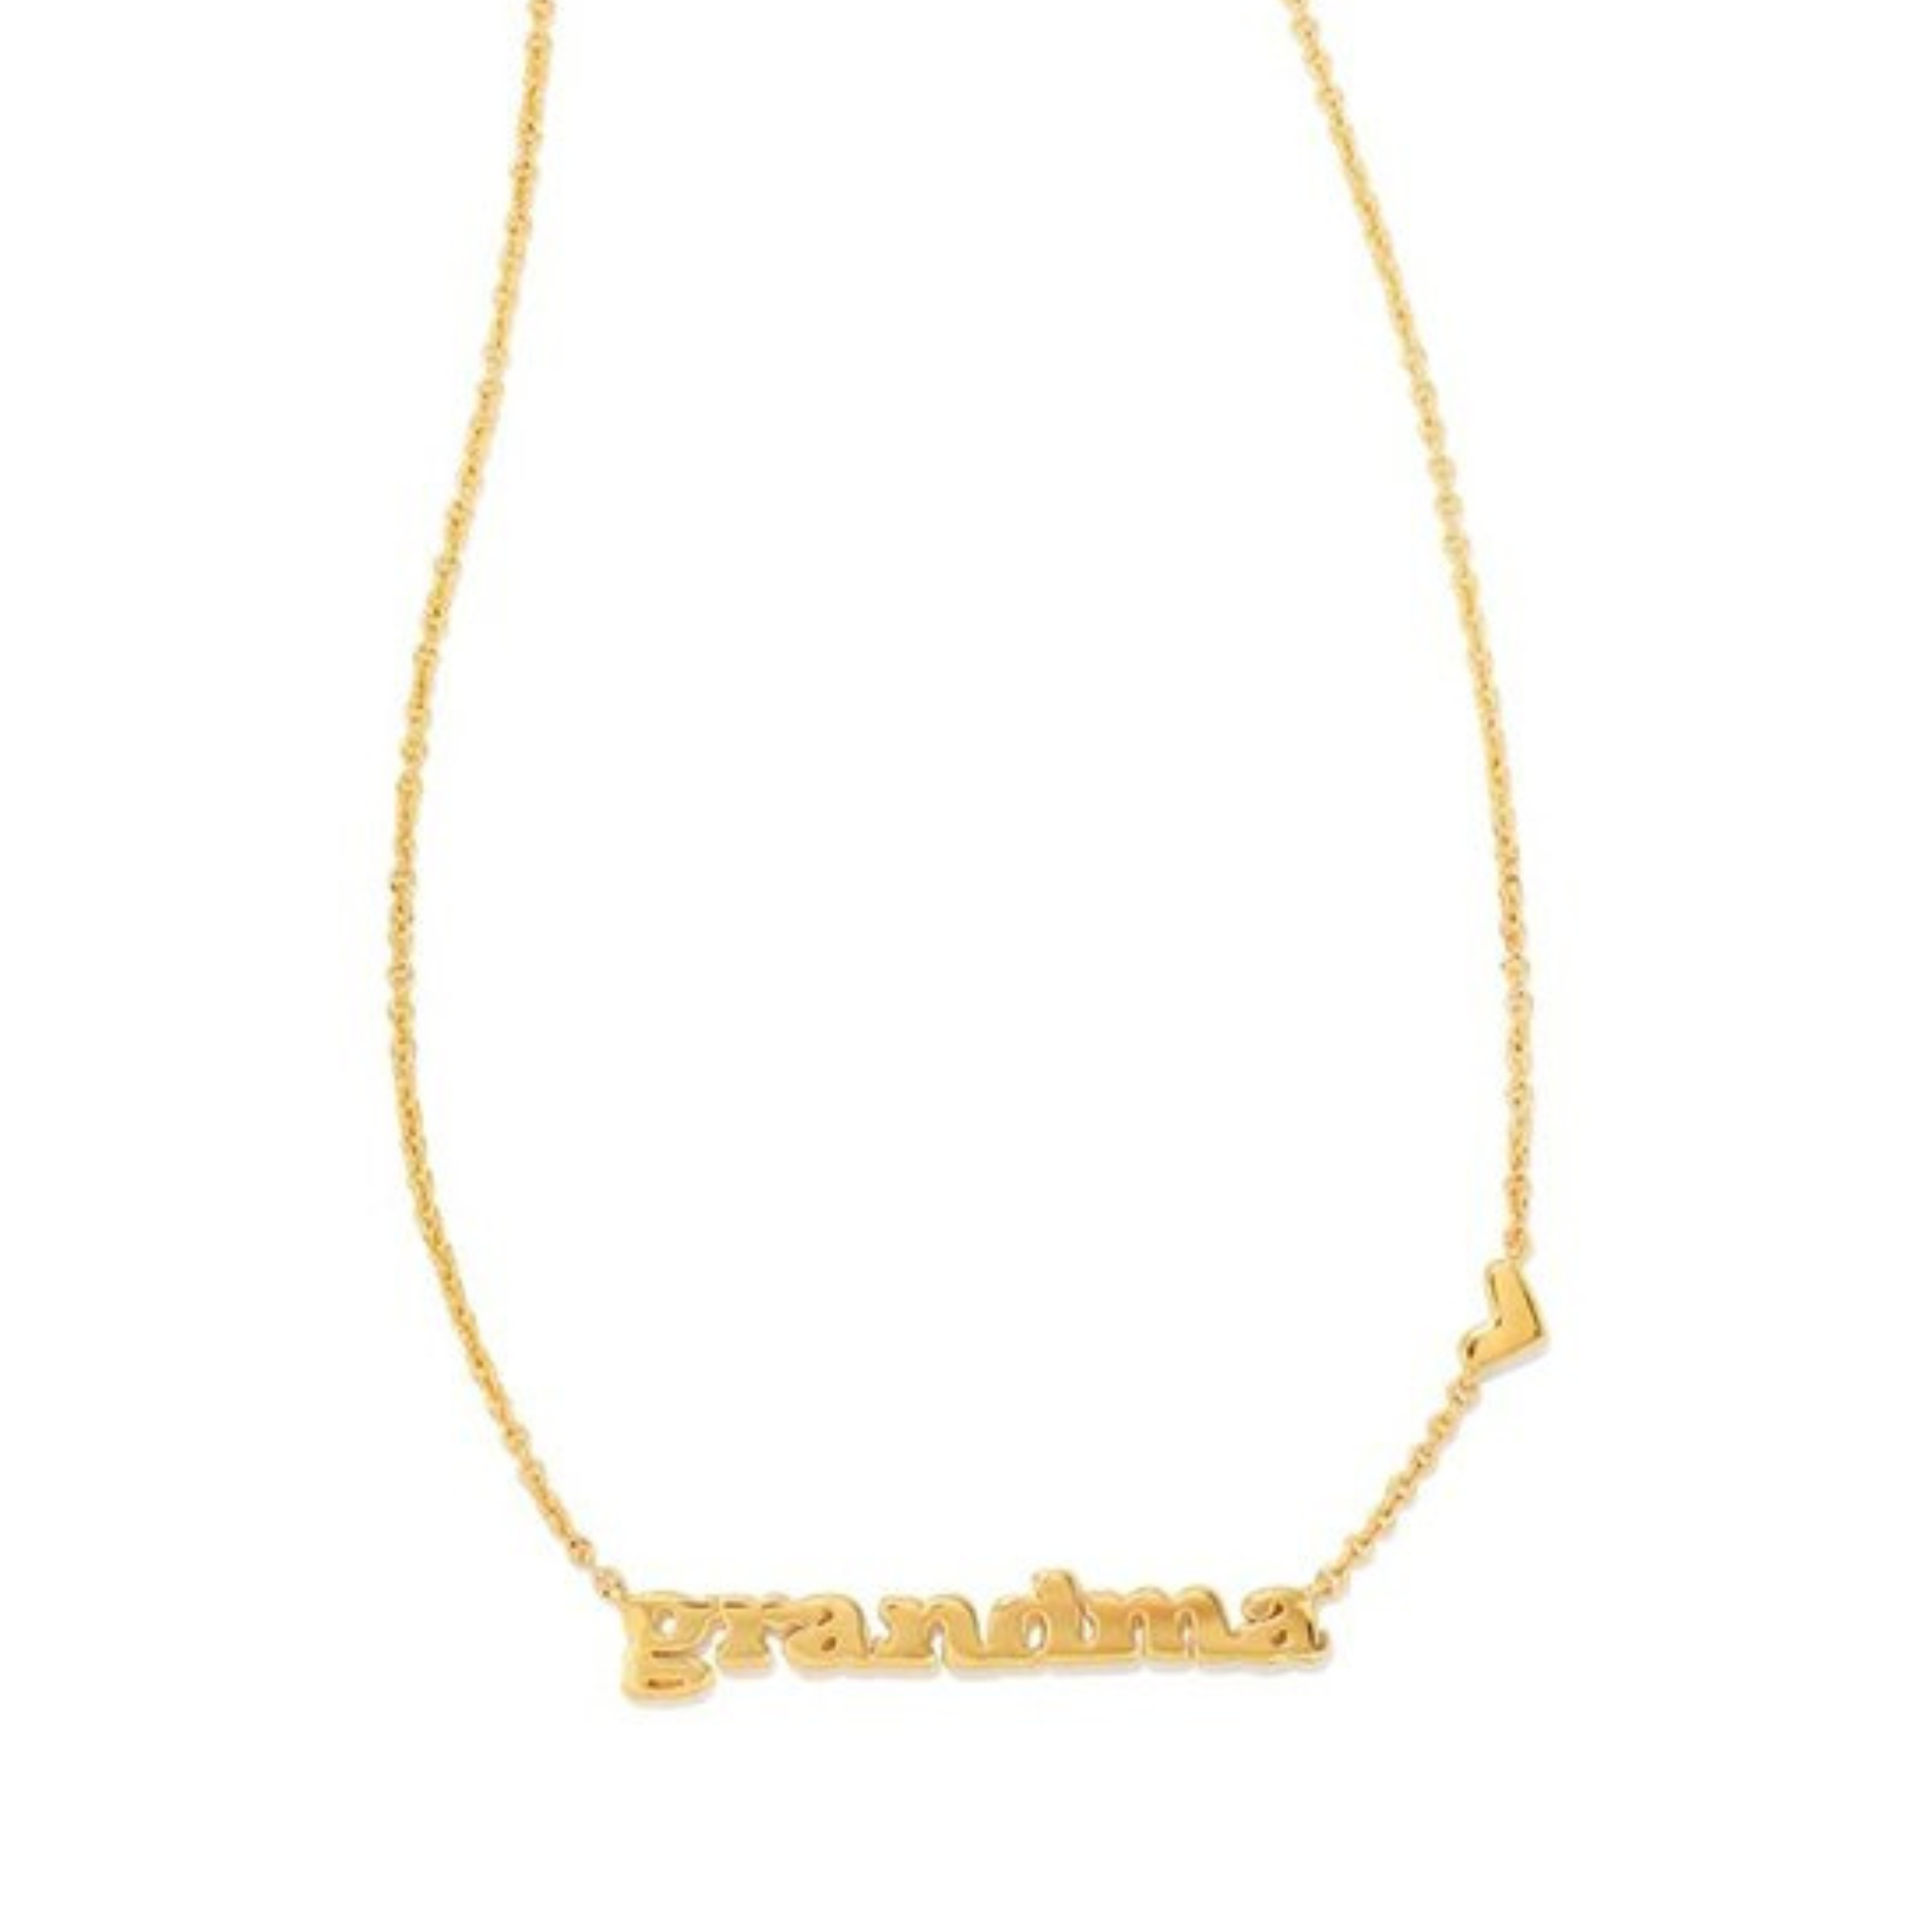 Gold necklace with the word grandma with a heart, pictured on a white background.